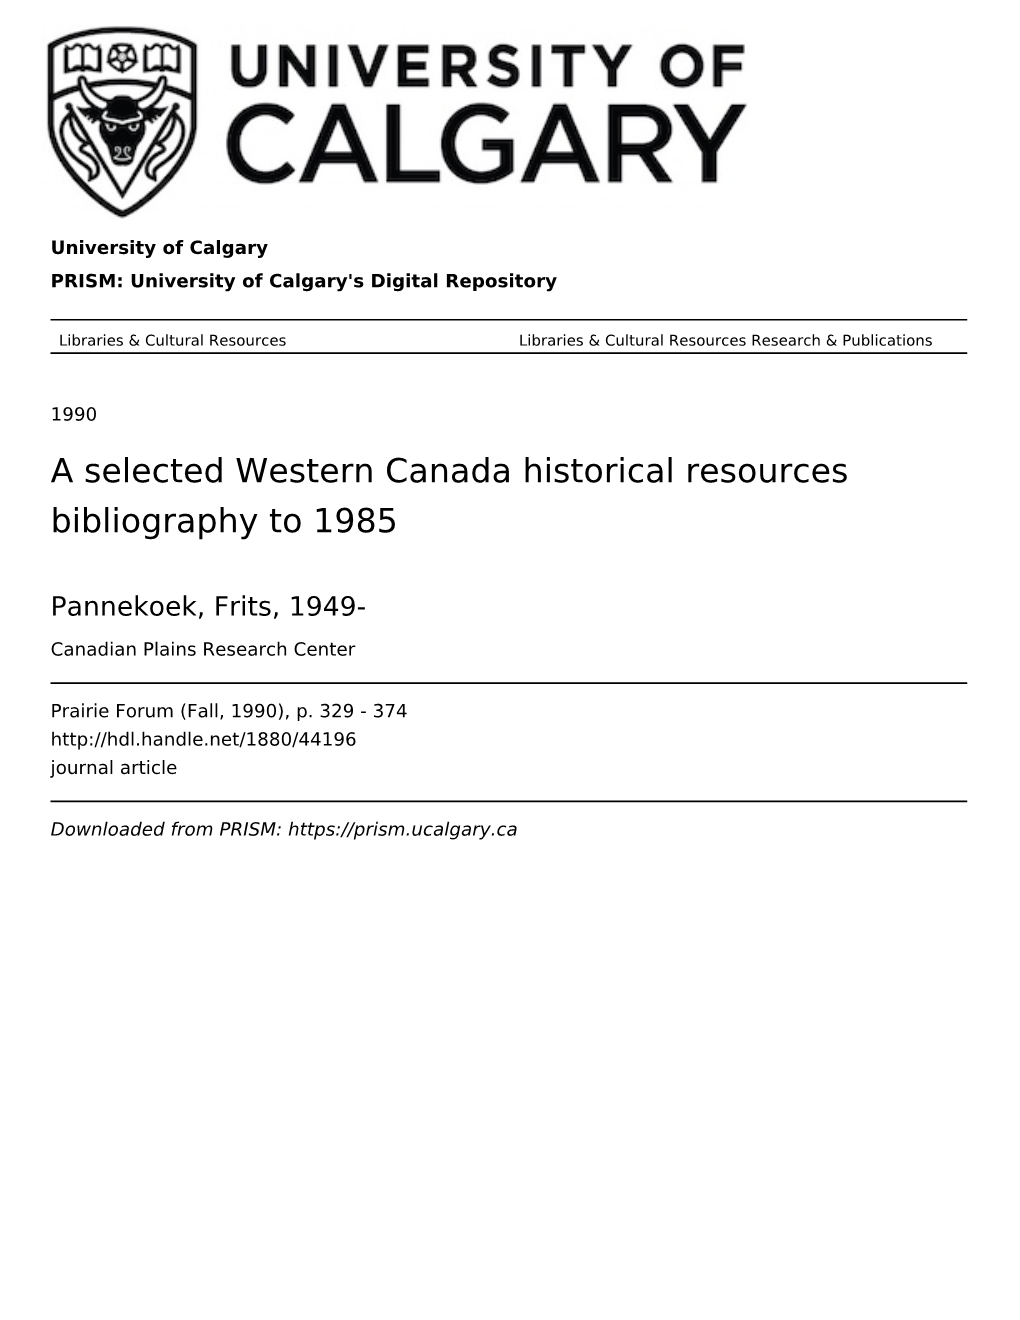 A Selected Western Canada Historical Resources Bibliography to 1985